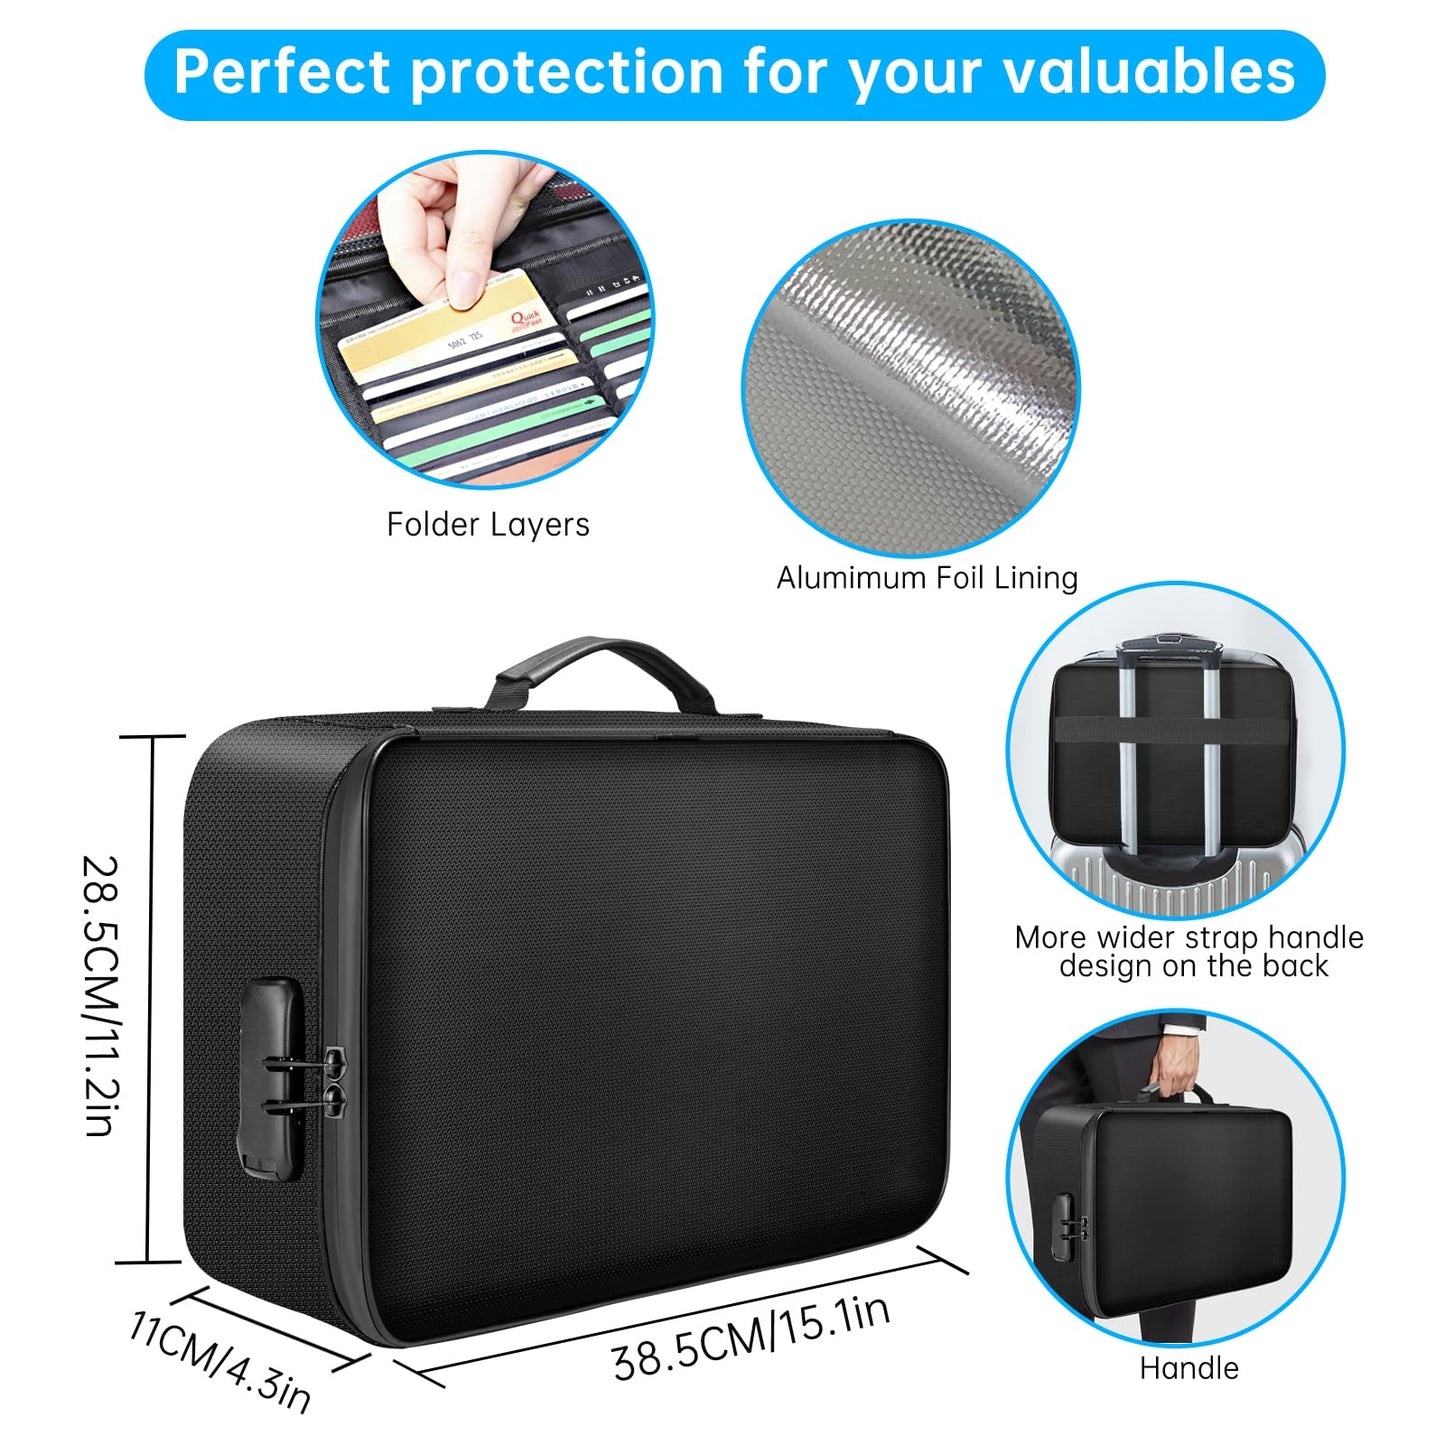 Document Storage Bag, Fire Resistant Document Bag with Money Pocket, Home Office Travel Security Bag with Lock, Multi-Layered Portable Document Storage Important Documents Passport Certificates Legal Documents